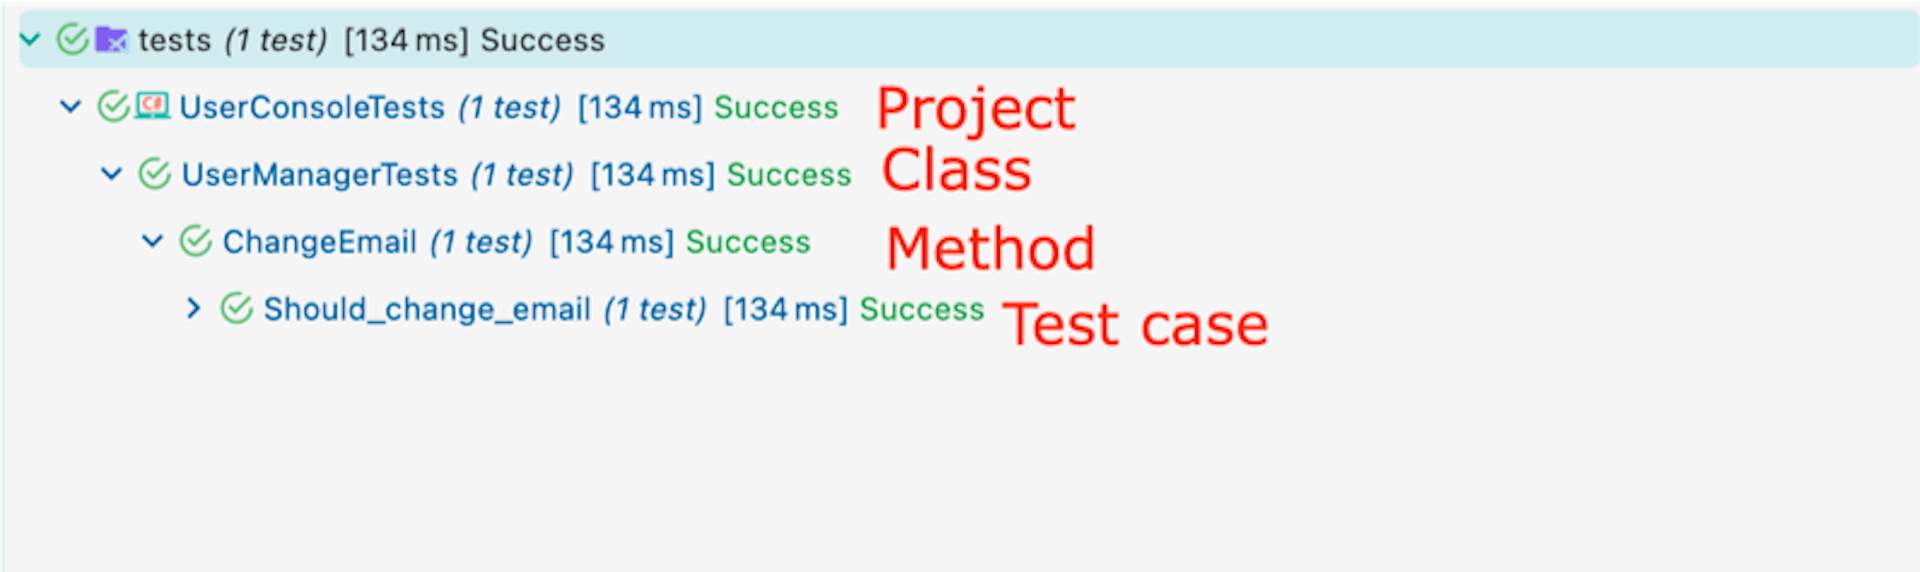 Tests for a class with multiple methods